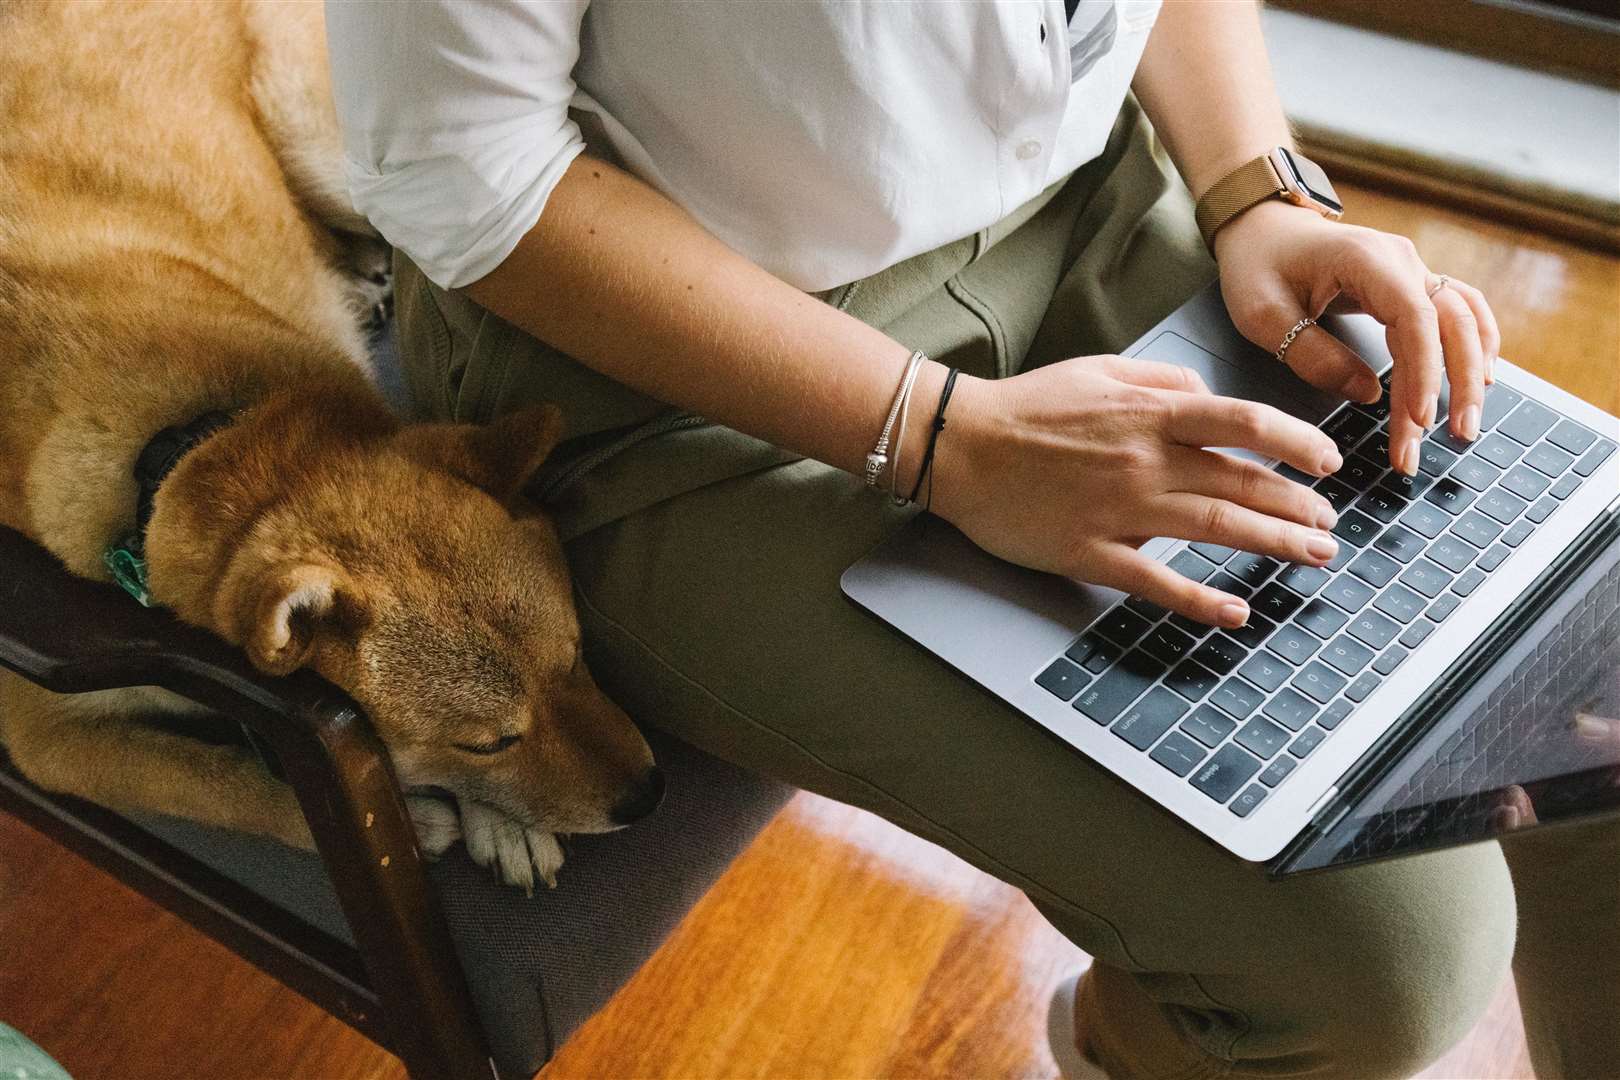 A survey found that nearly half of remote workers think dogs in the office is a good policy. Photo by Meruyert Gonullu from Pexels.